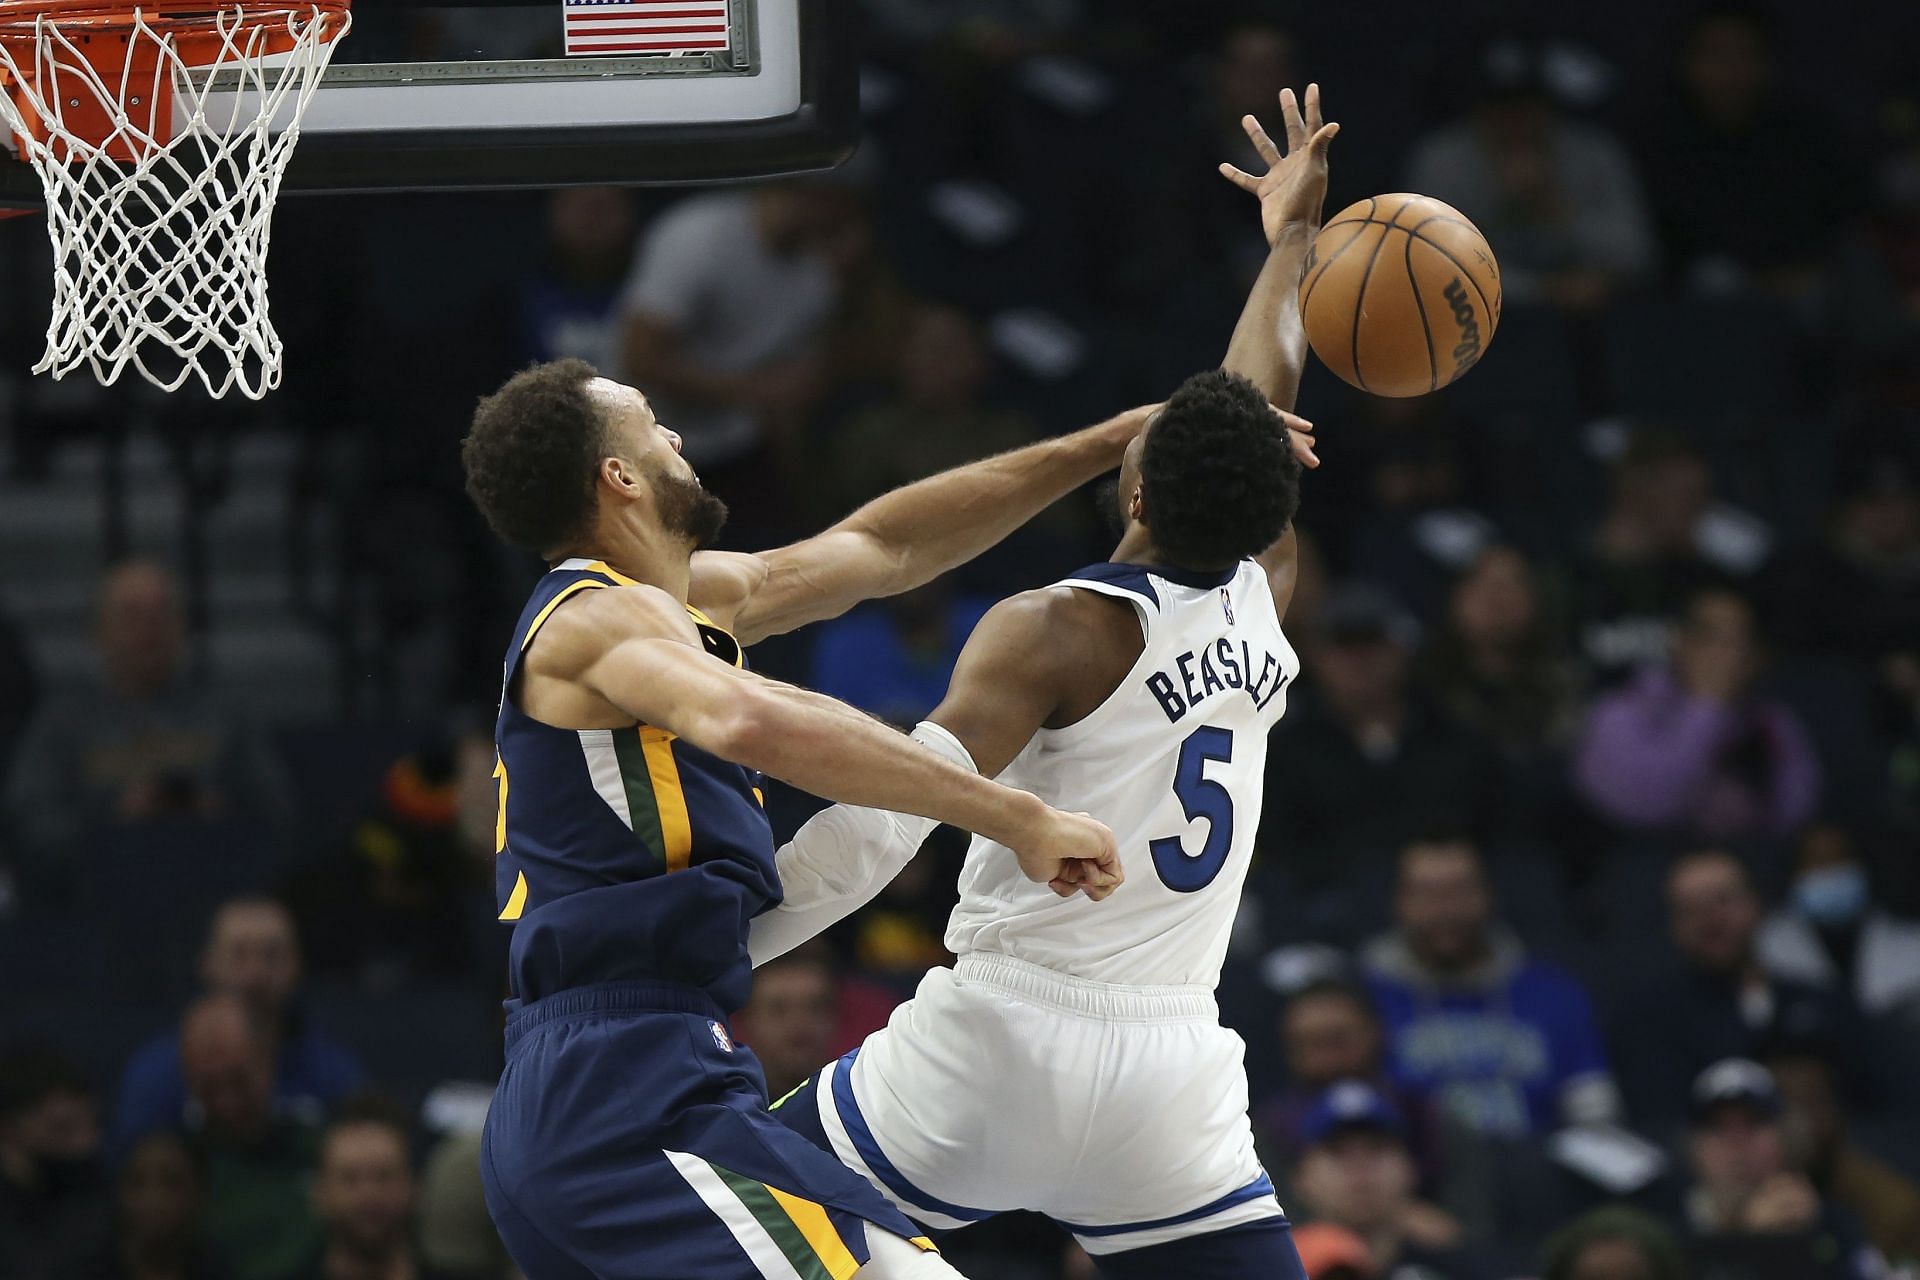 The Utah Jazz rely on the three-time and reigning Defensive Player of the Year Rudy Gobert to protect the rim. [Photo: Star Tribune]